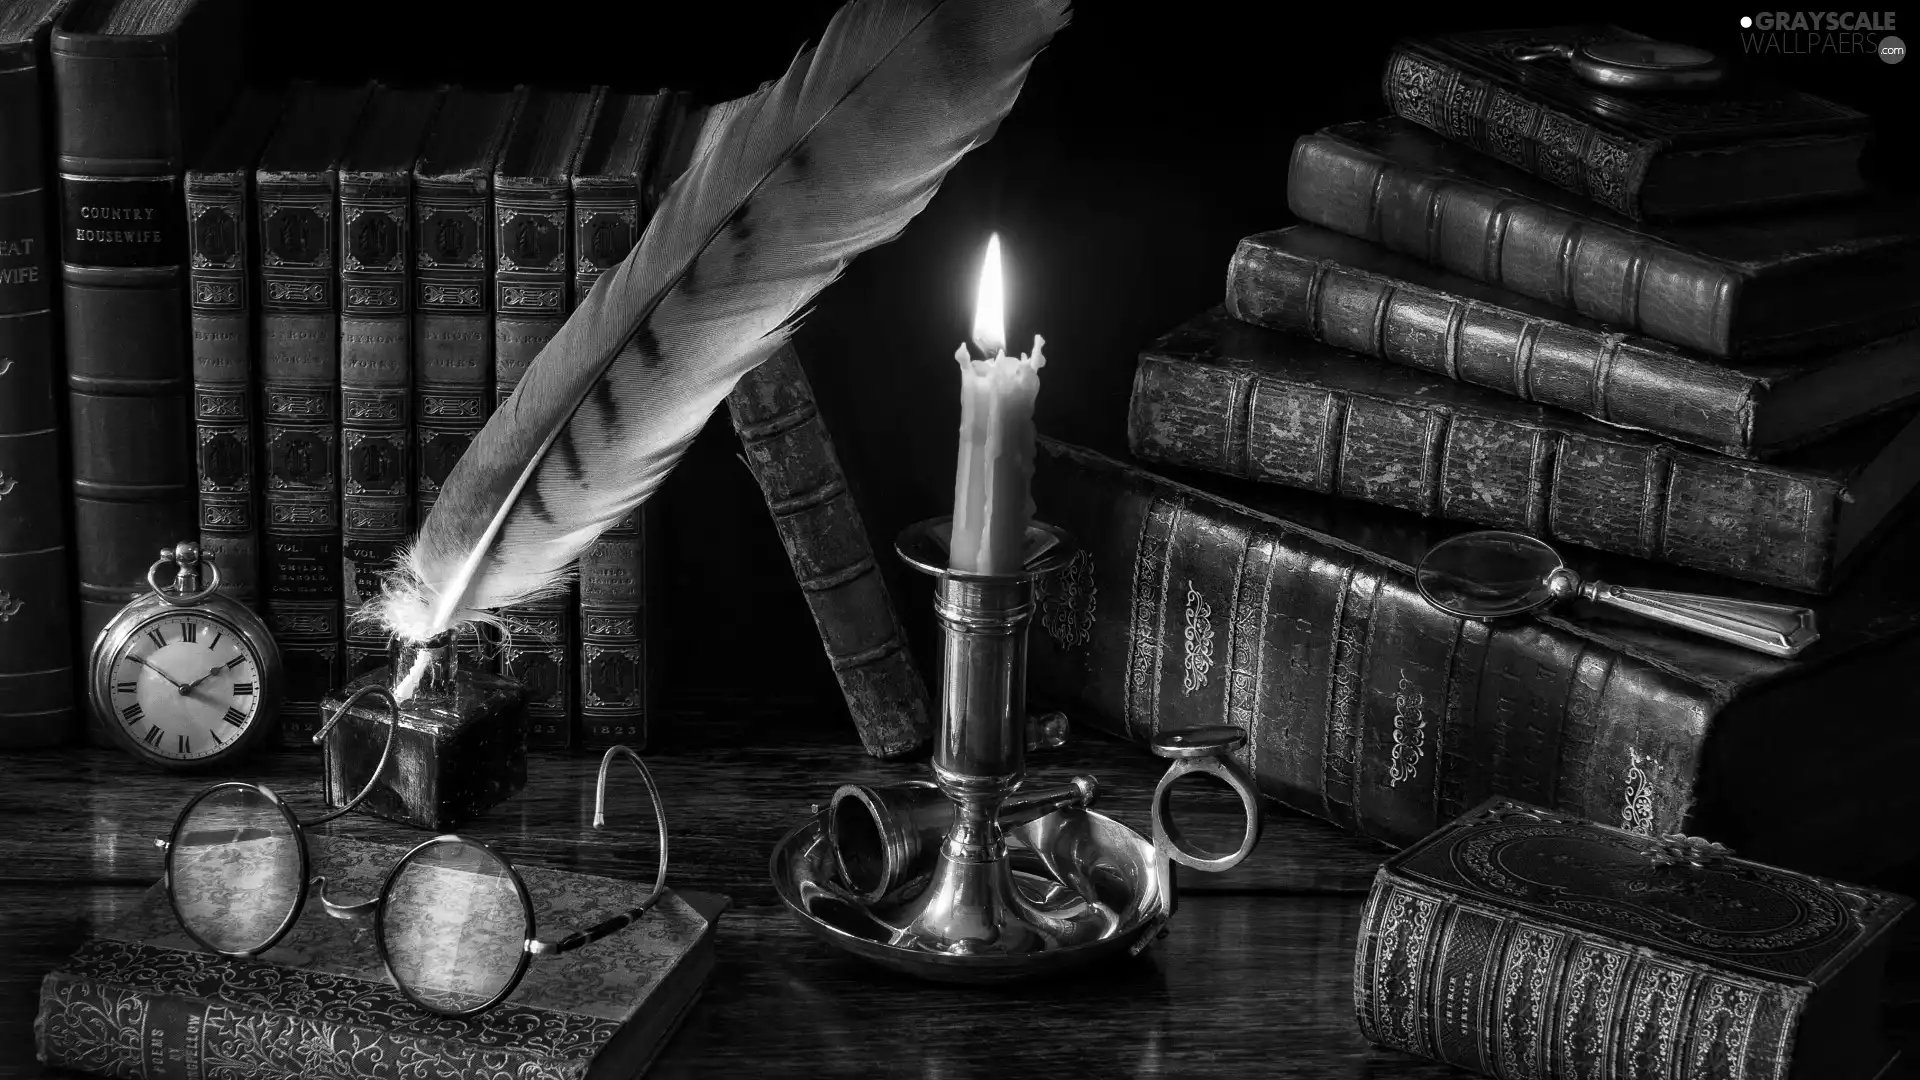 candle, Books, inkwell, Glasses, composition, pen, Watch